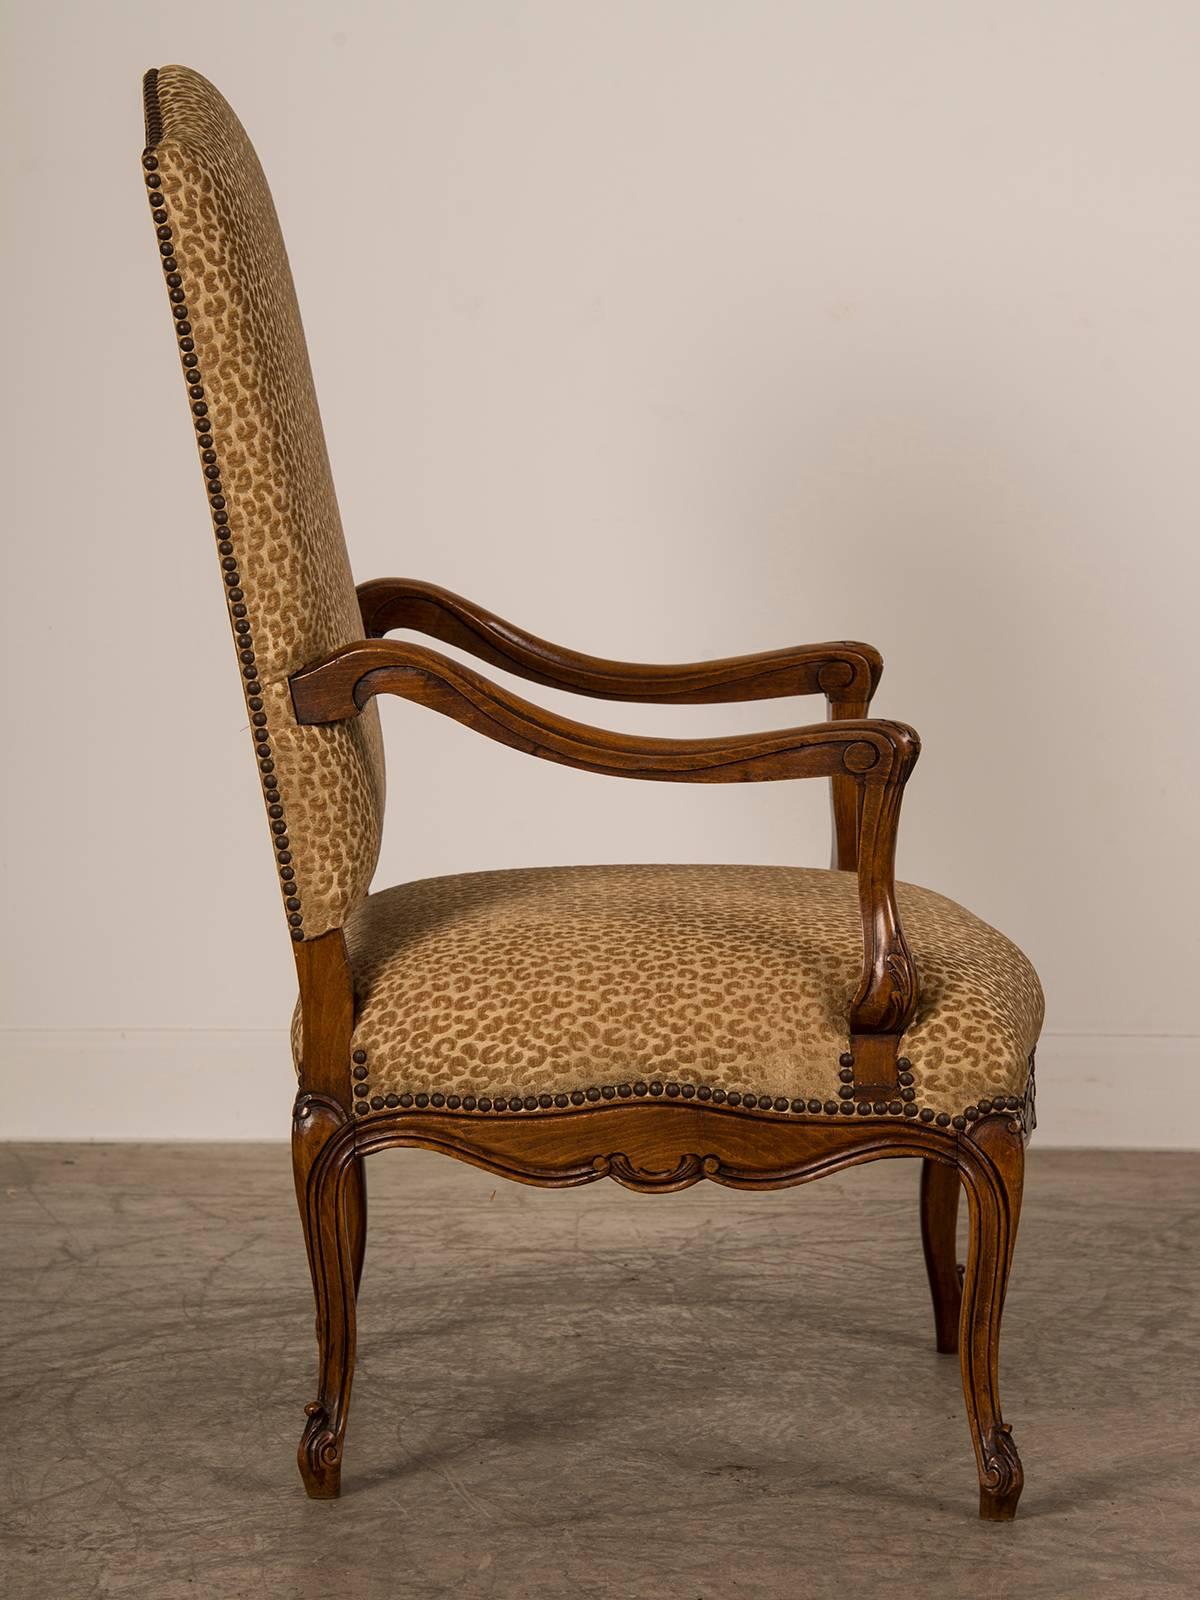 Antique French Louis XV Style Walnut Armchair ‘Fauteuil’, circa 1880 For Sale 2